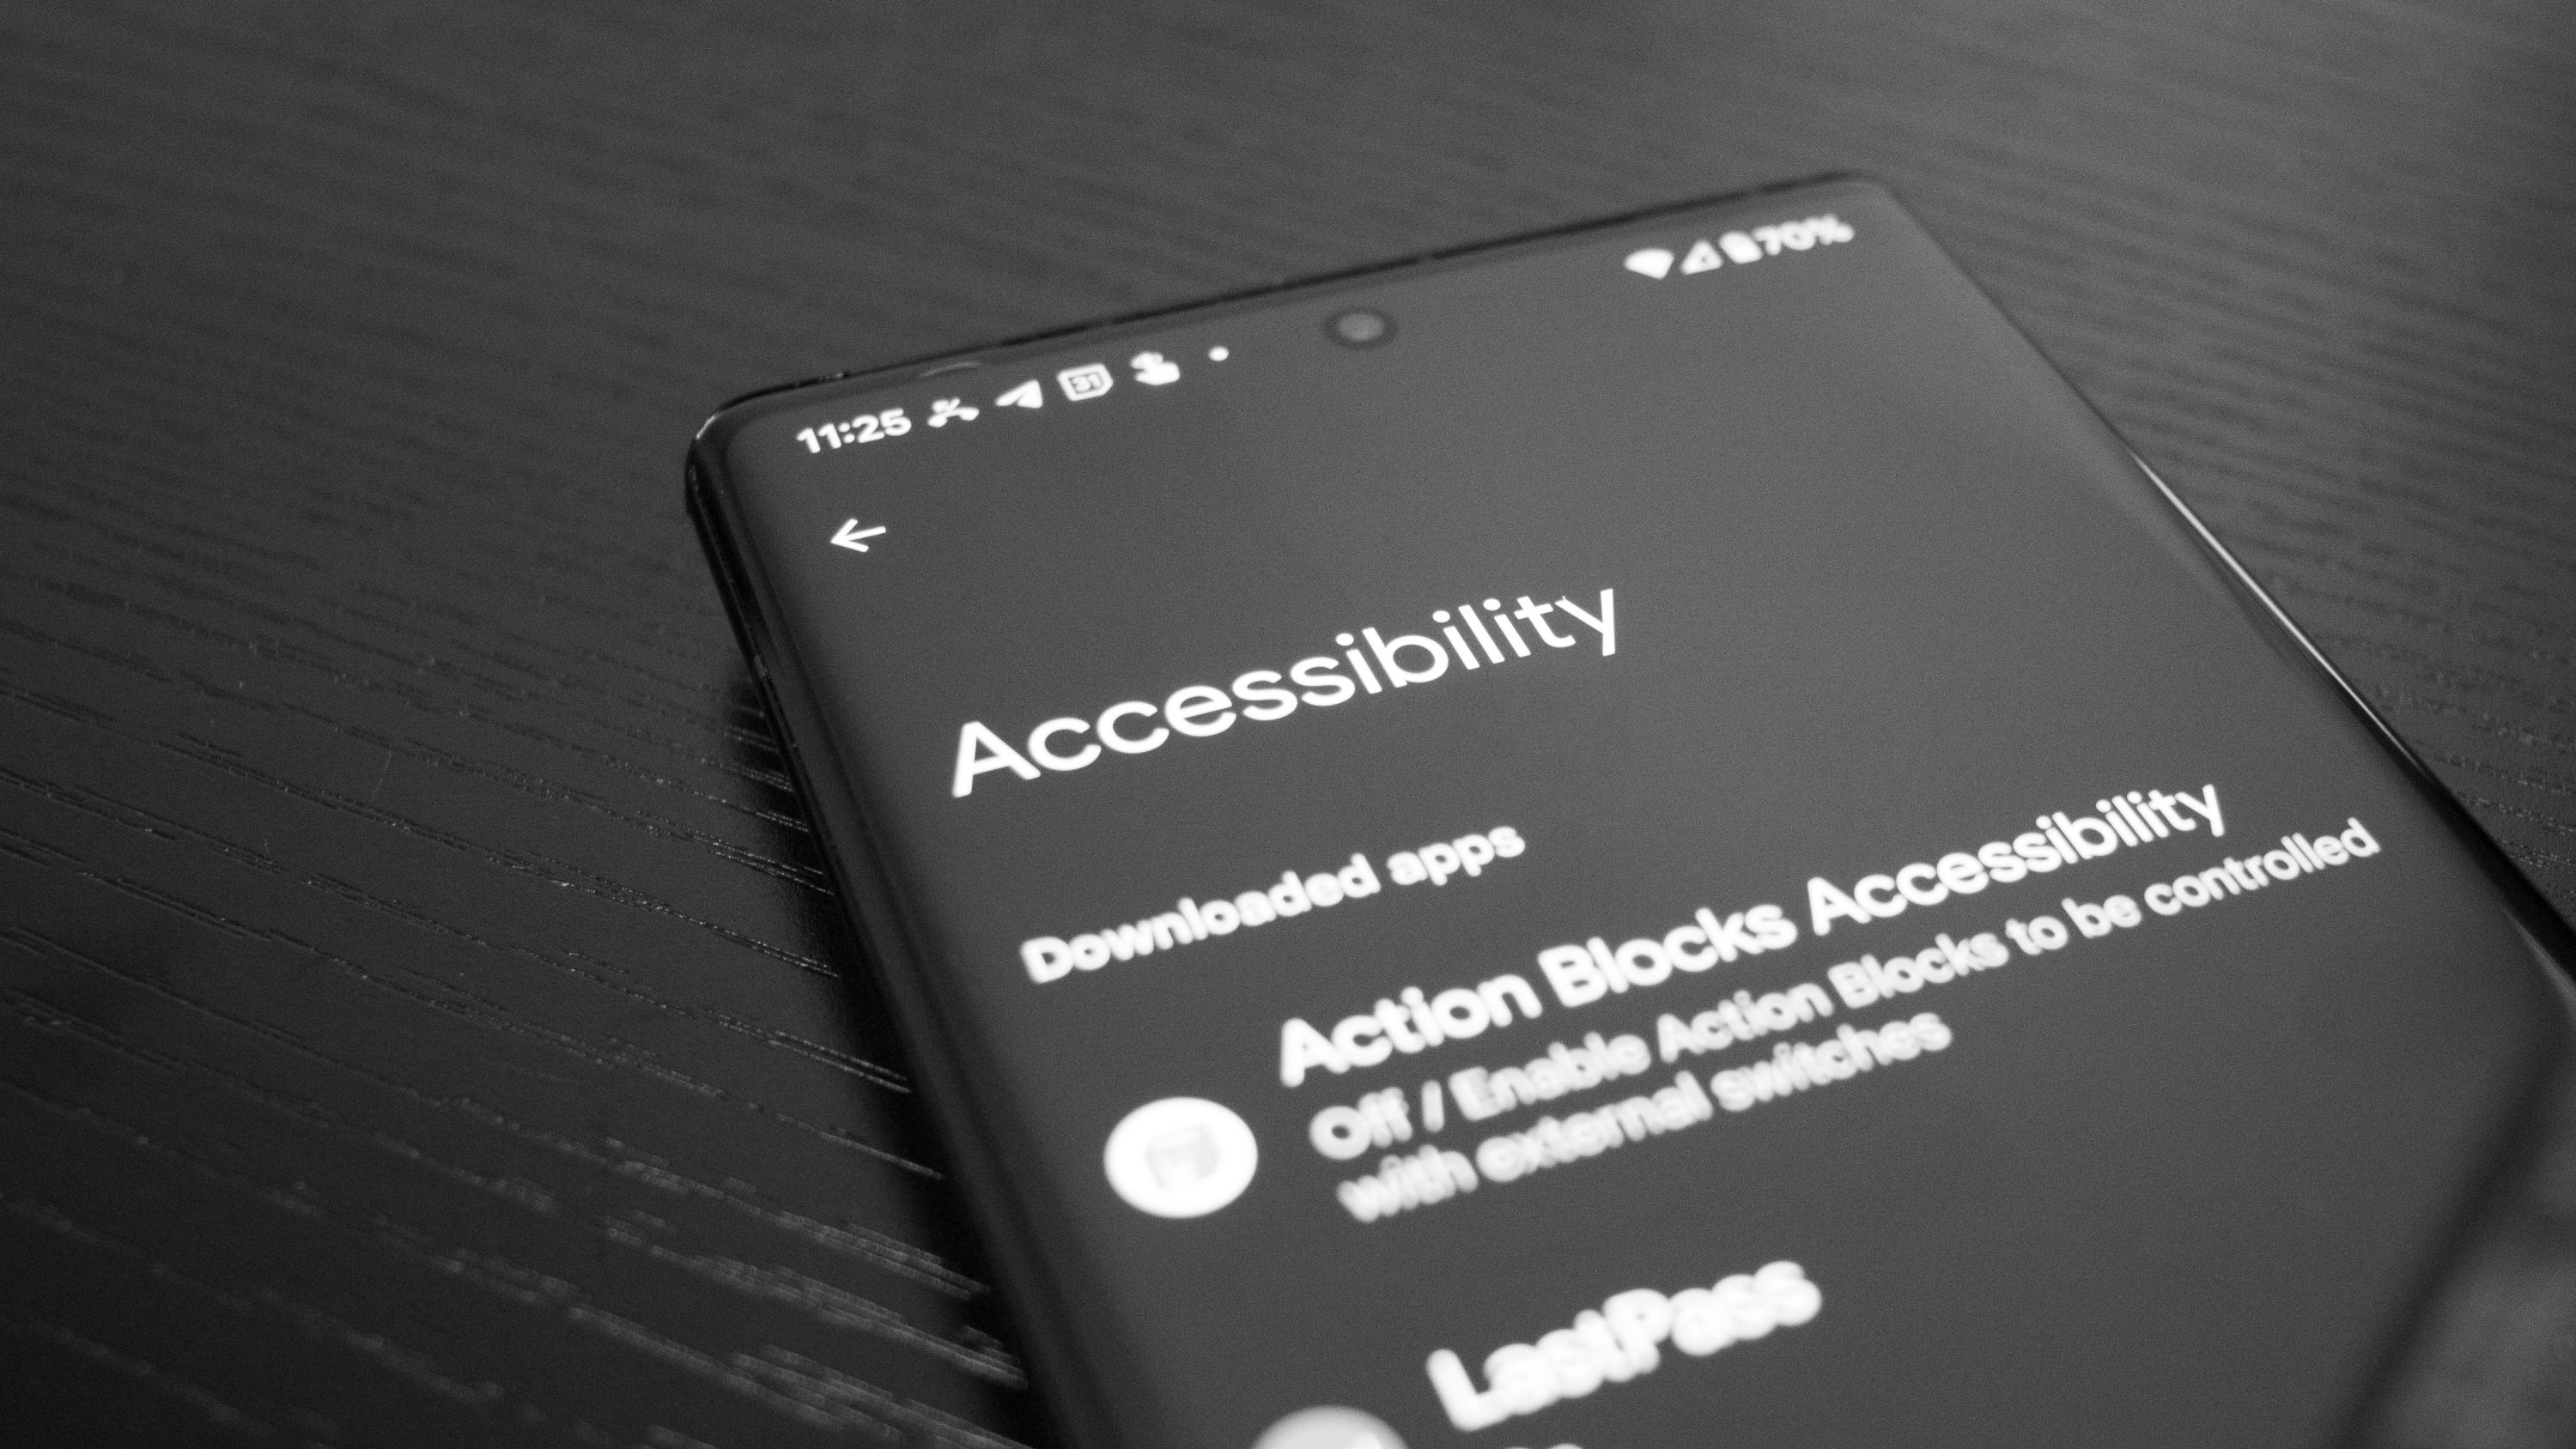 Researchers from the Center for Advanced Communications Policy recently released their 2022 accessibility report for mobile phones.